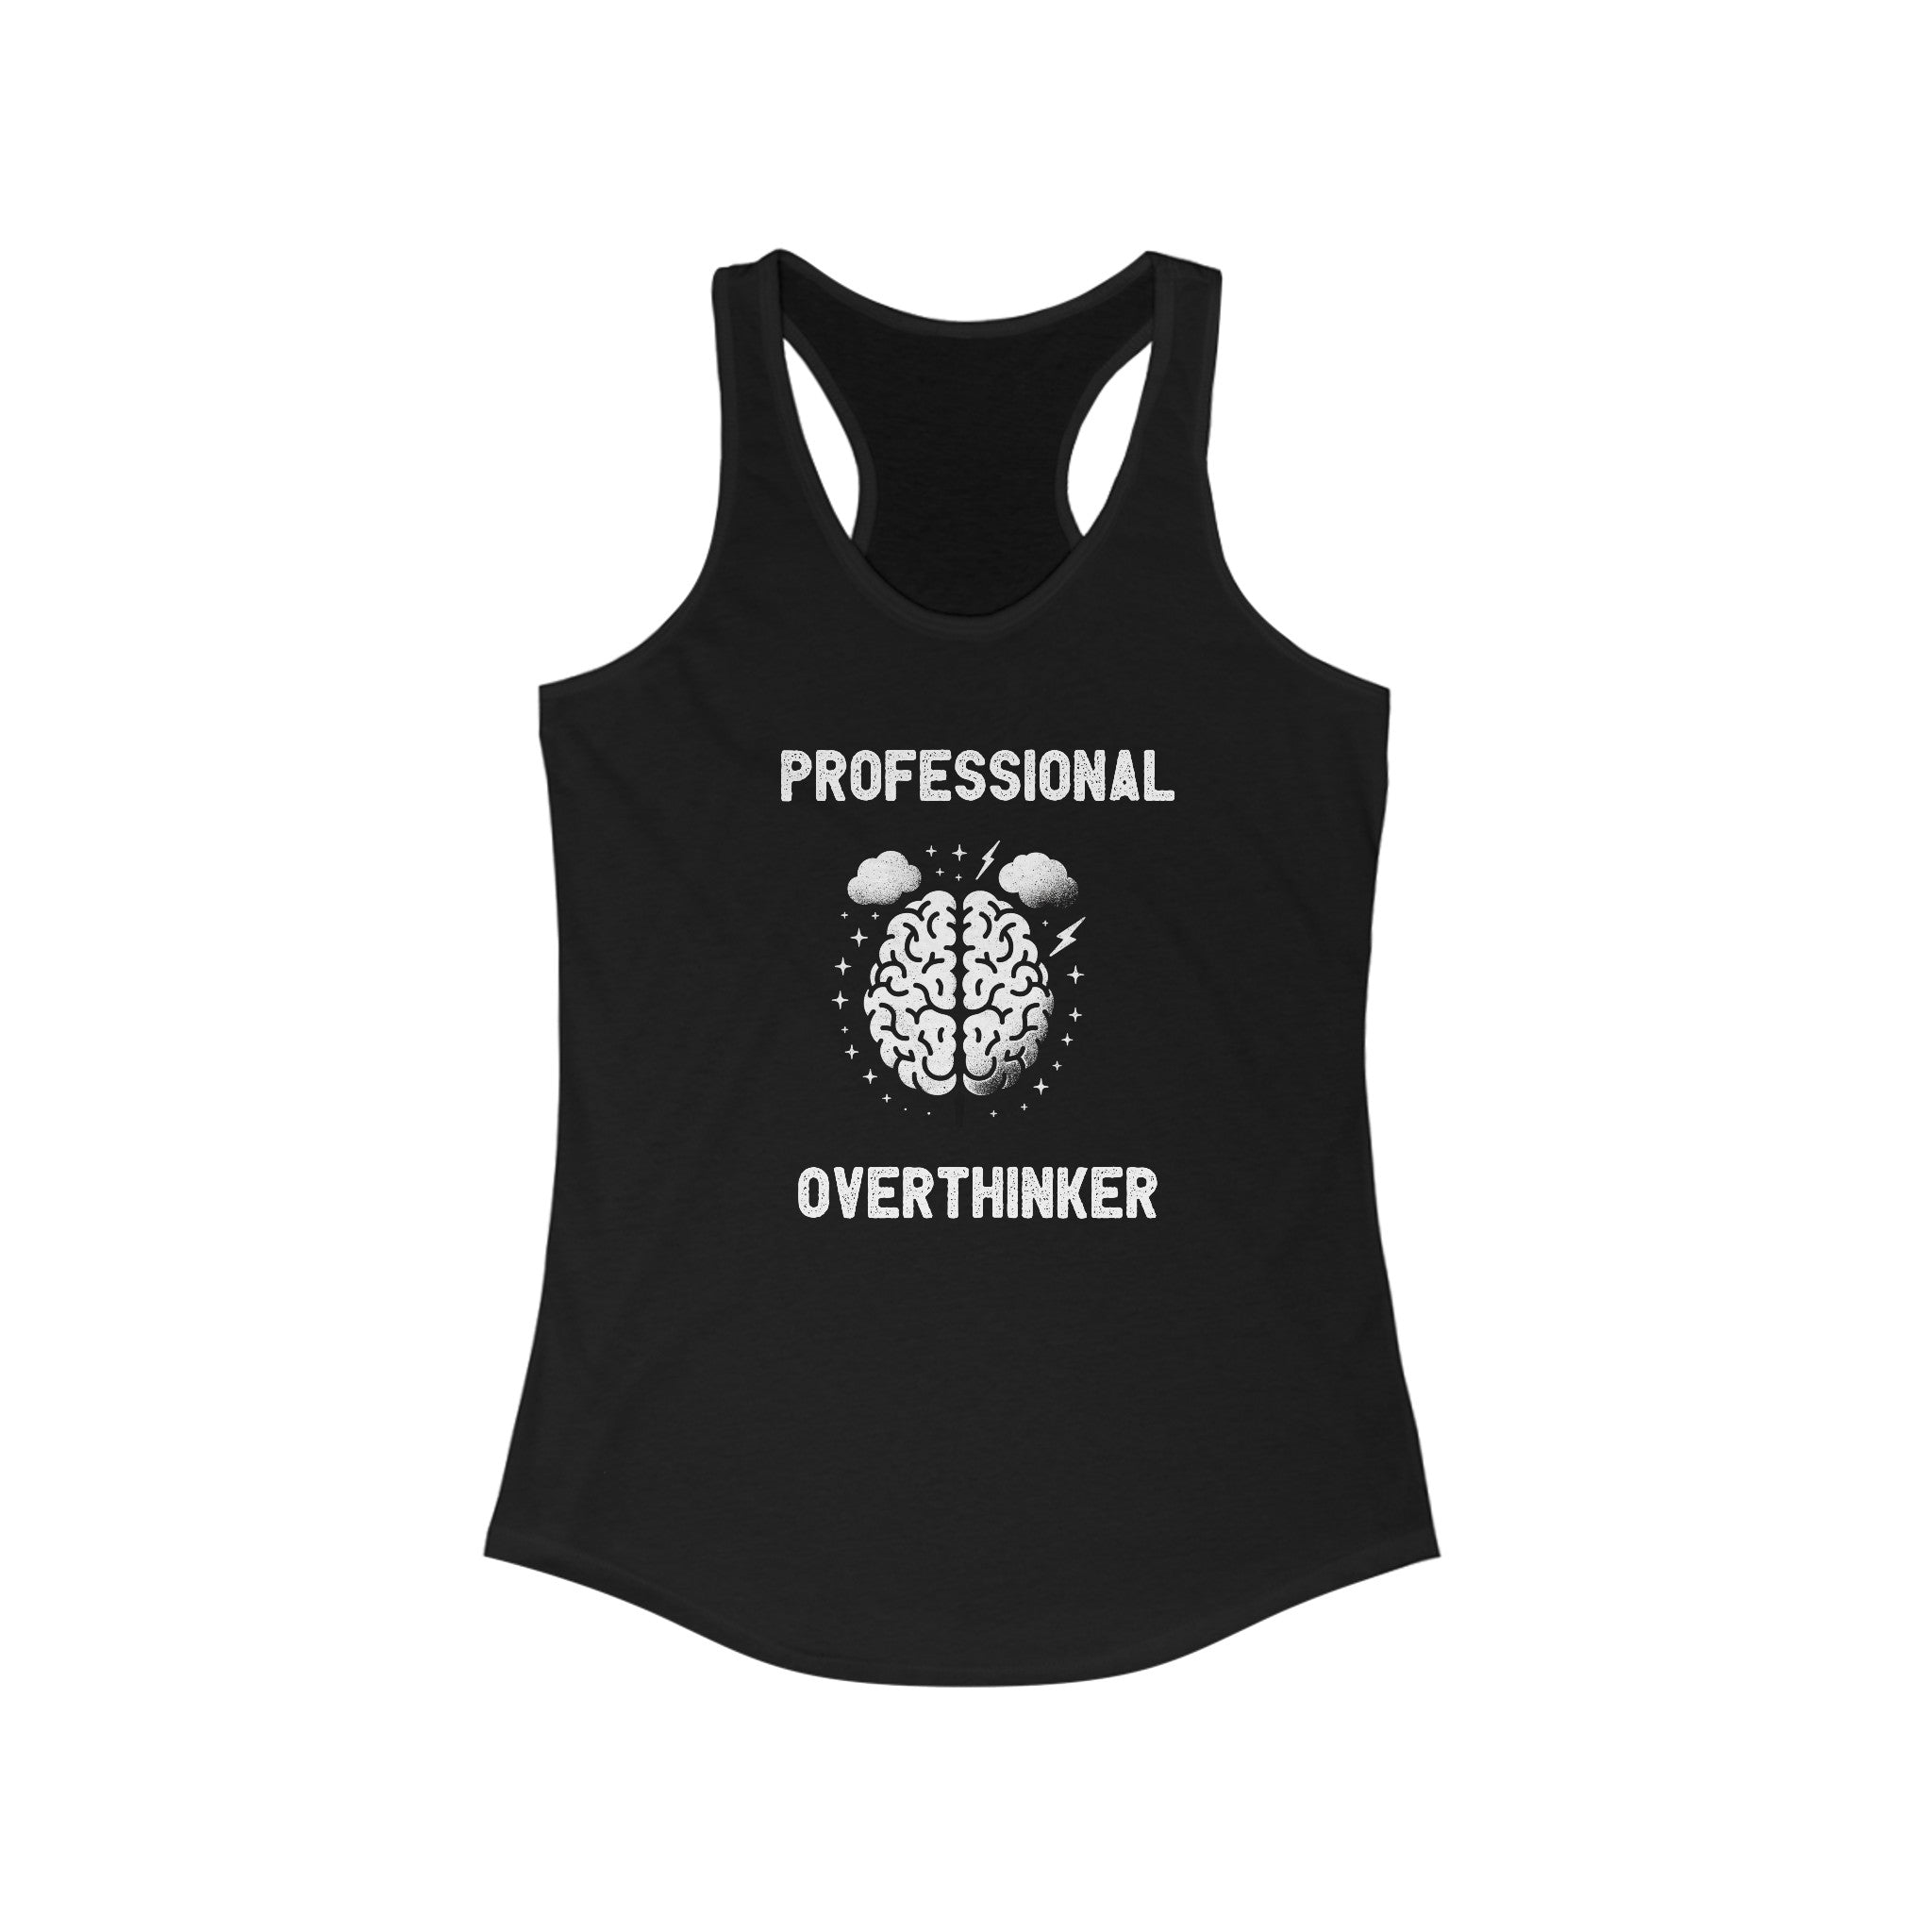 Professional Overthinker - Women's Racerback Tank in black with the "Professional Overthinker" design, featuring text above and below an illustration of a brain with gears and bolts. Perfect for an active lifestyle.